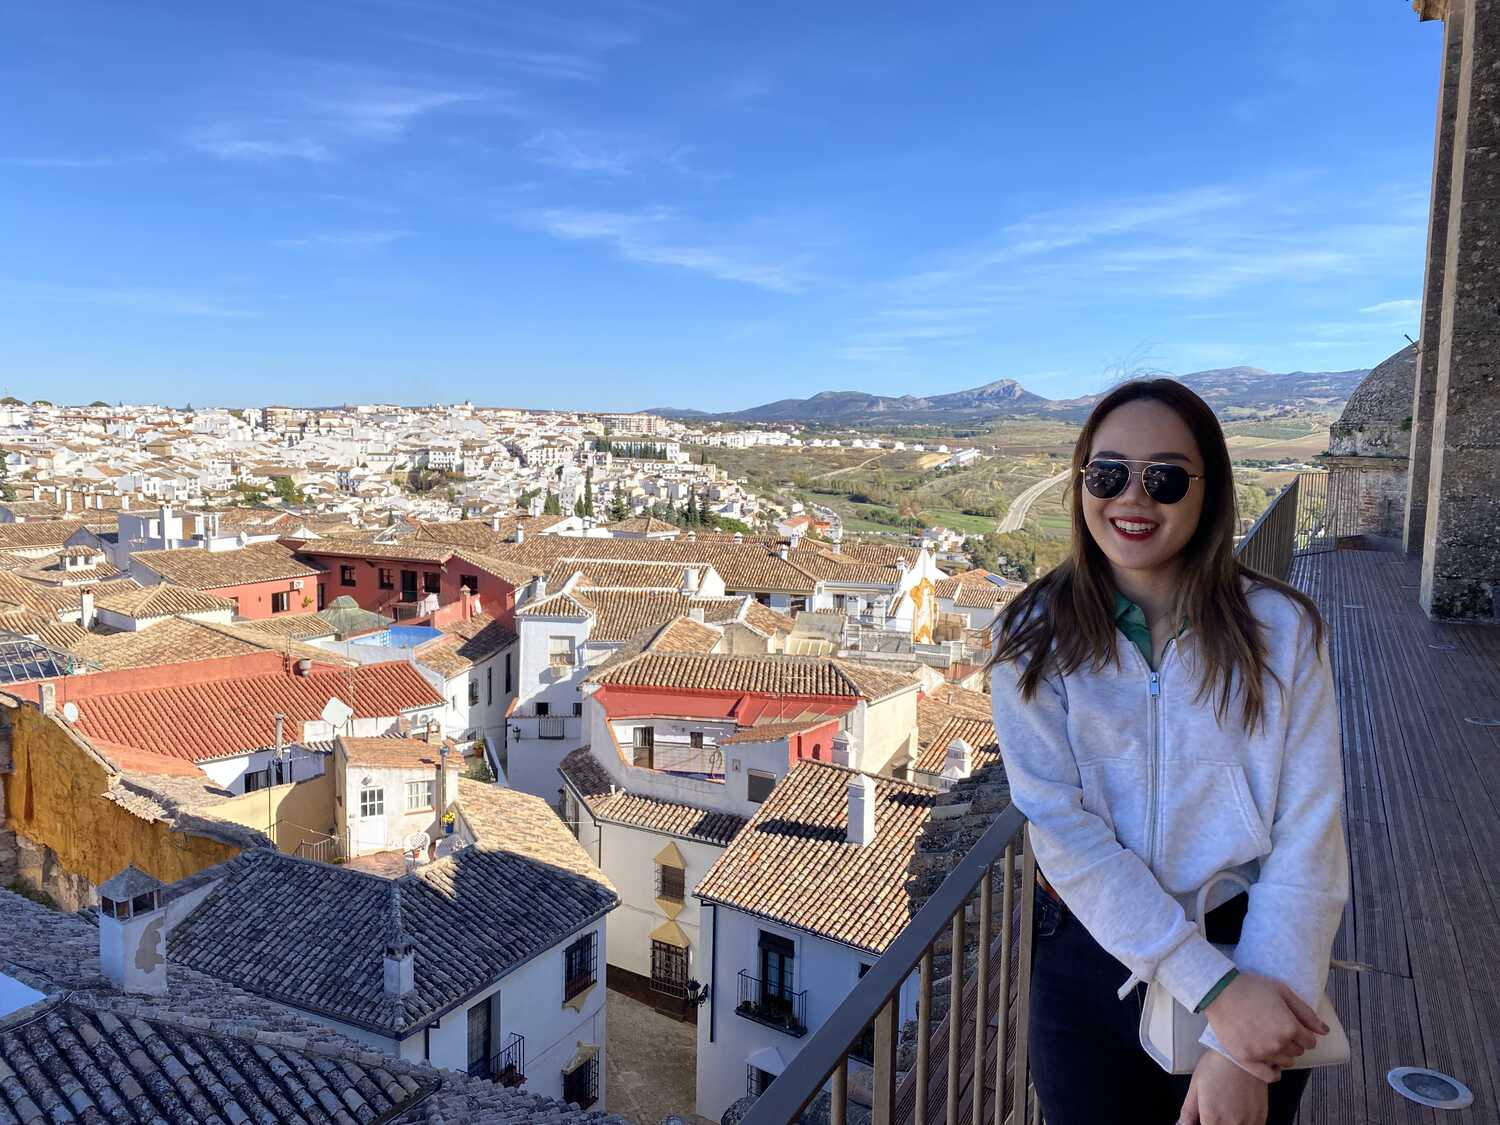 Woman smiling on a balcony overlooking the white houses and hills of Ronda, Spain.